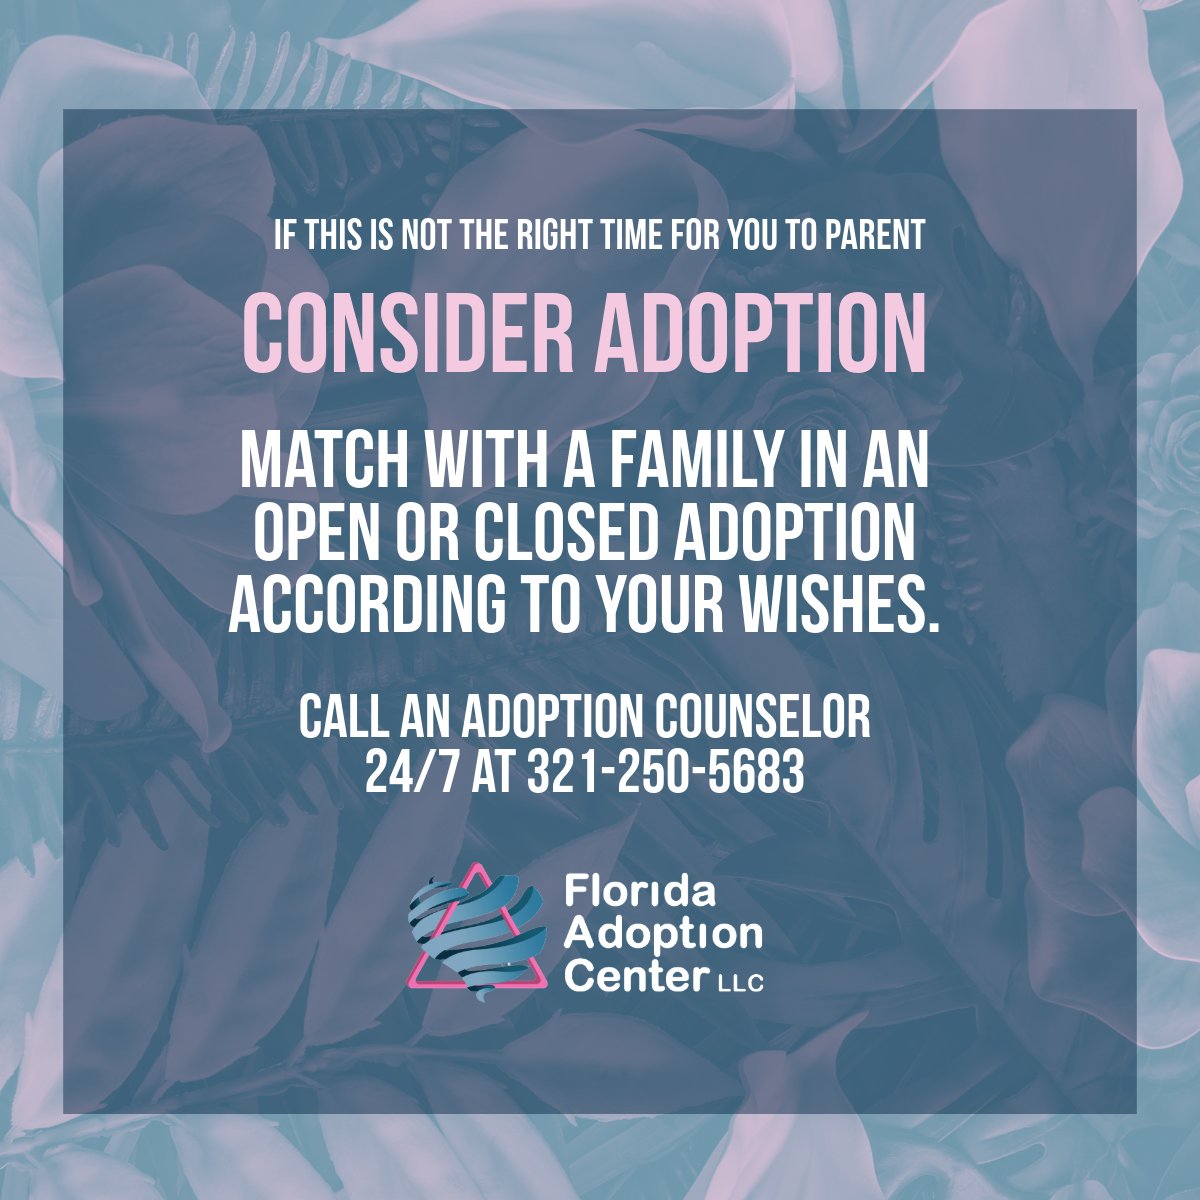 Explore adoption options with no pressure. 

At Florida Adoption Center love makes a difference!

#FloridaAdoptionCenter #AdoptionSupport #AdoptionInformation #AdoptionEducation  #AdoptionInspiration #AdoptionJourney #FloridaAdoption #AdoptionAgencyFlorida #OpenAdoption